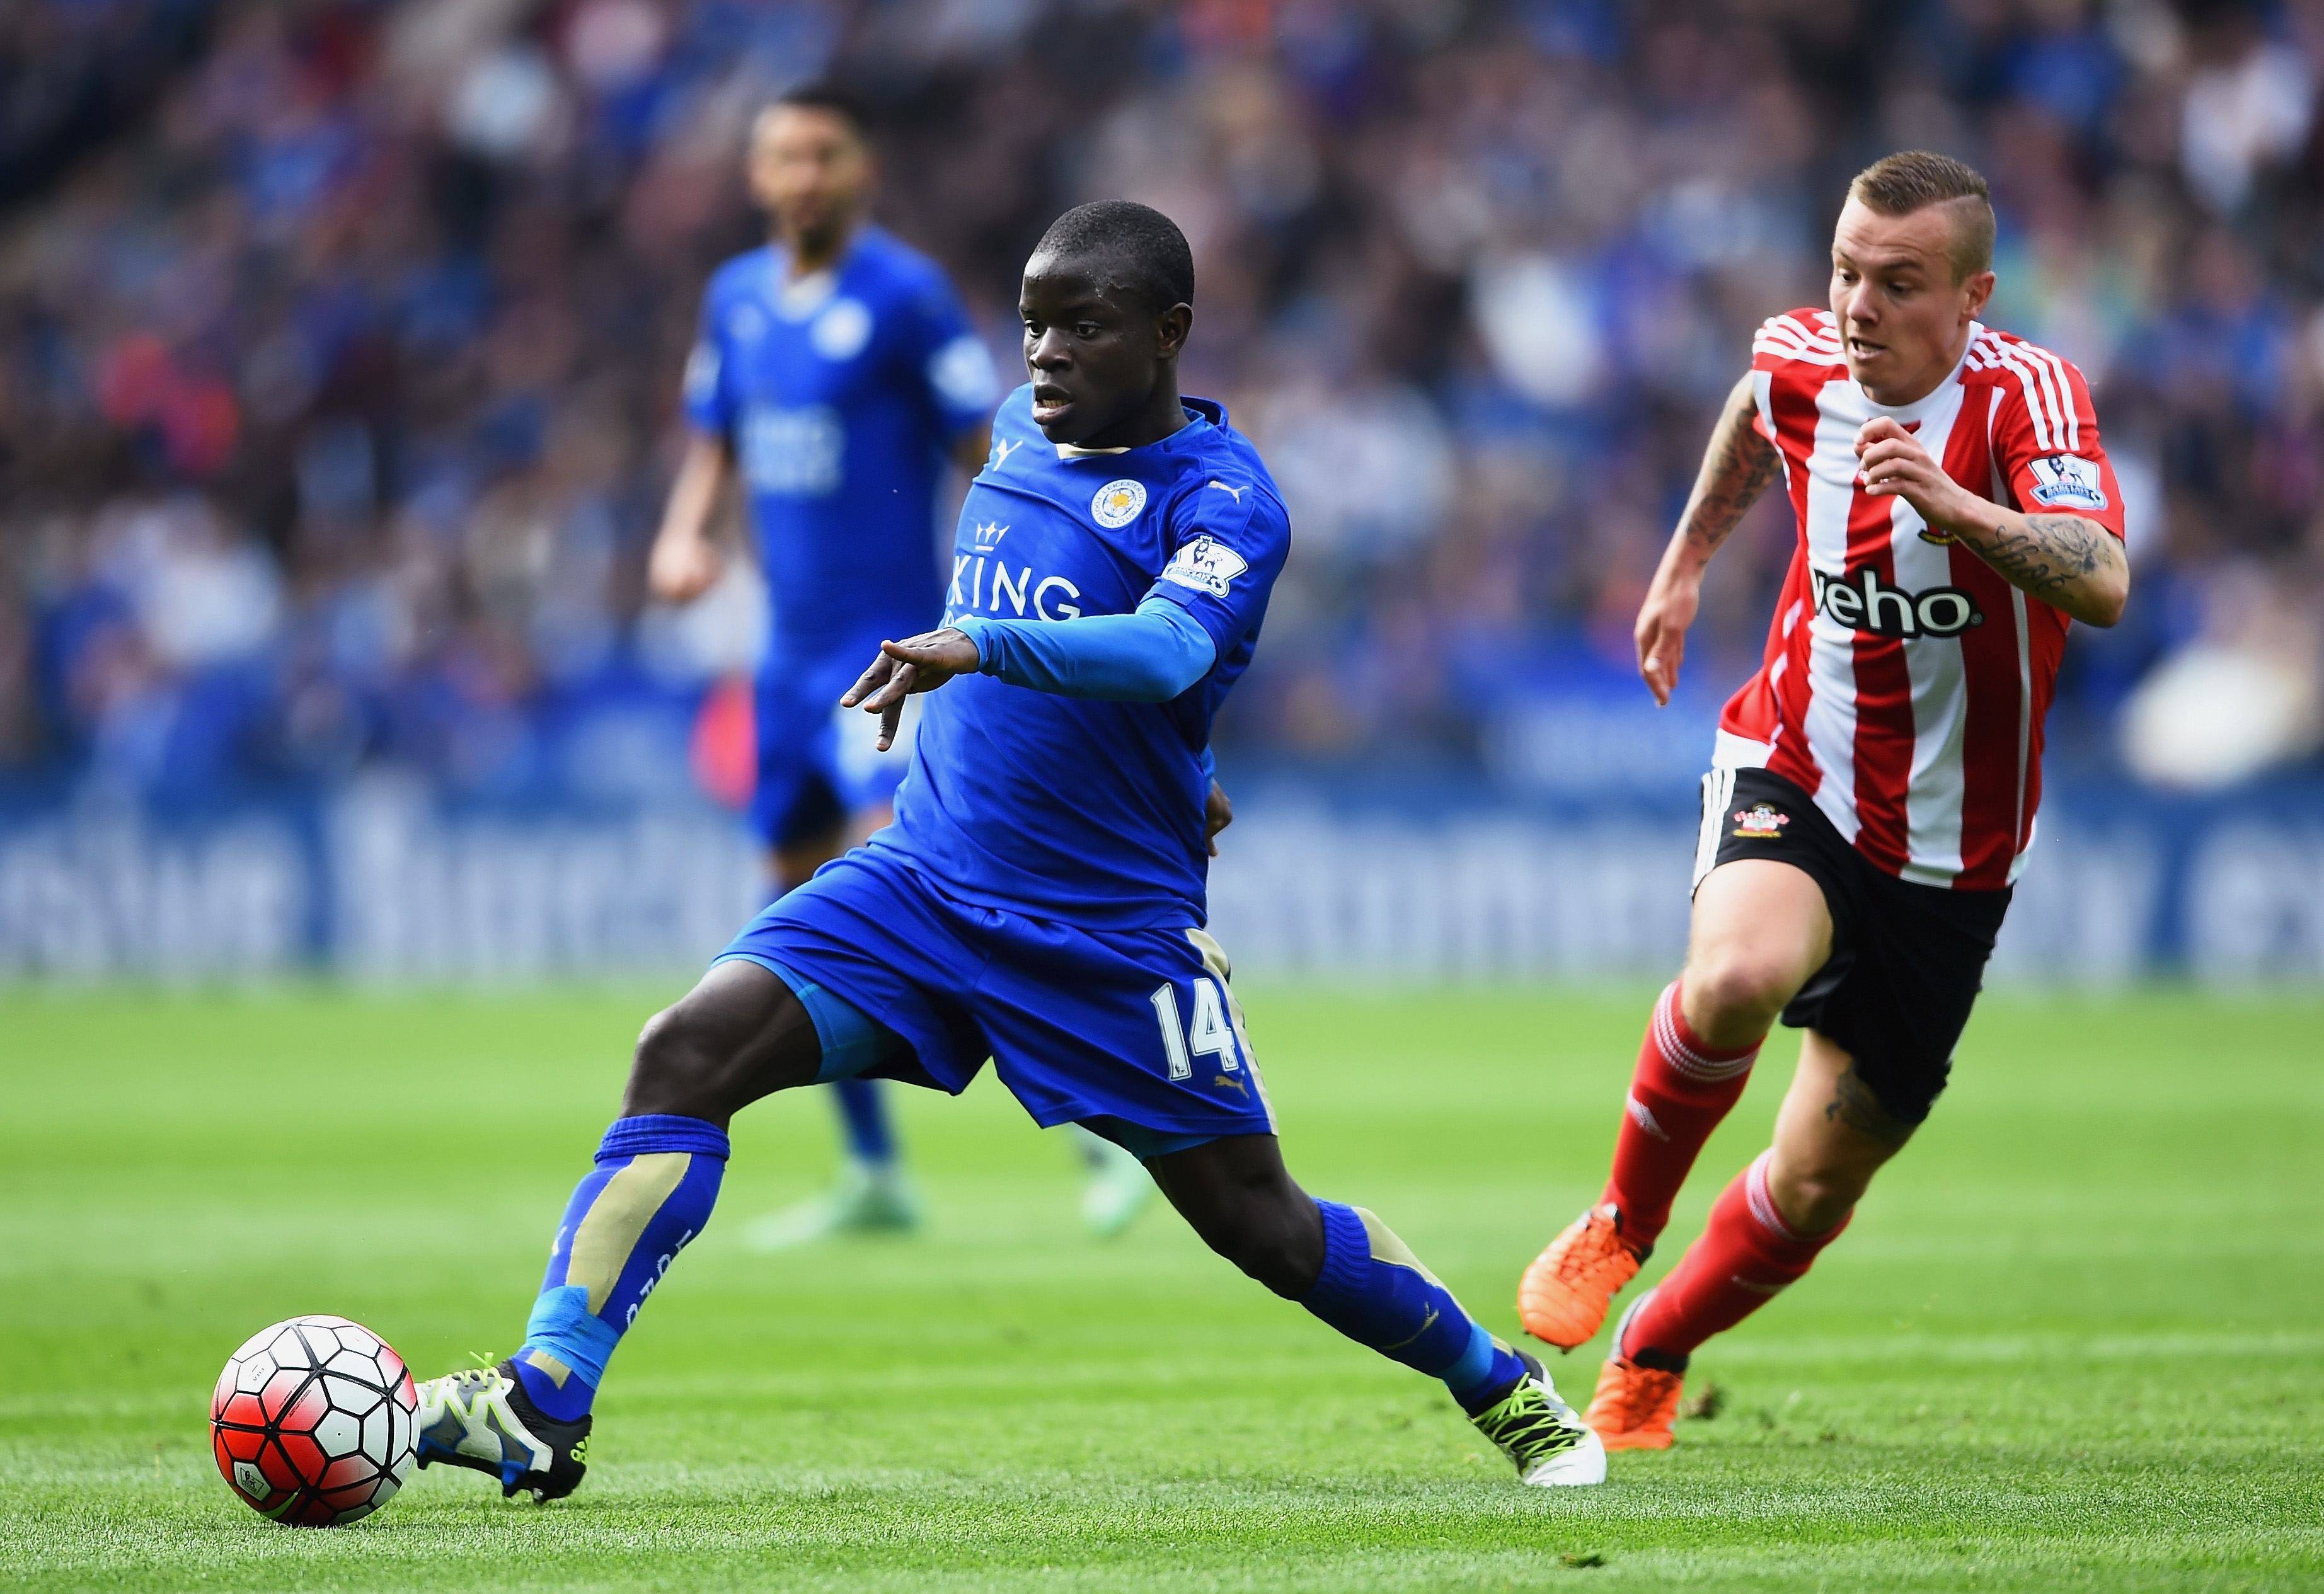 LEICESTER, ENGLAND - APRIL 03:  Ngolo Kante of Leicester City is watced by Jordy Clasie of Southampton during the Barclays Premier League match between Leicester City and Southampton at The King Power Stadium on April 3, 2016 in Leicester, England.  (Photo by Laurence Griffiths/Getty Images)